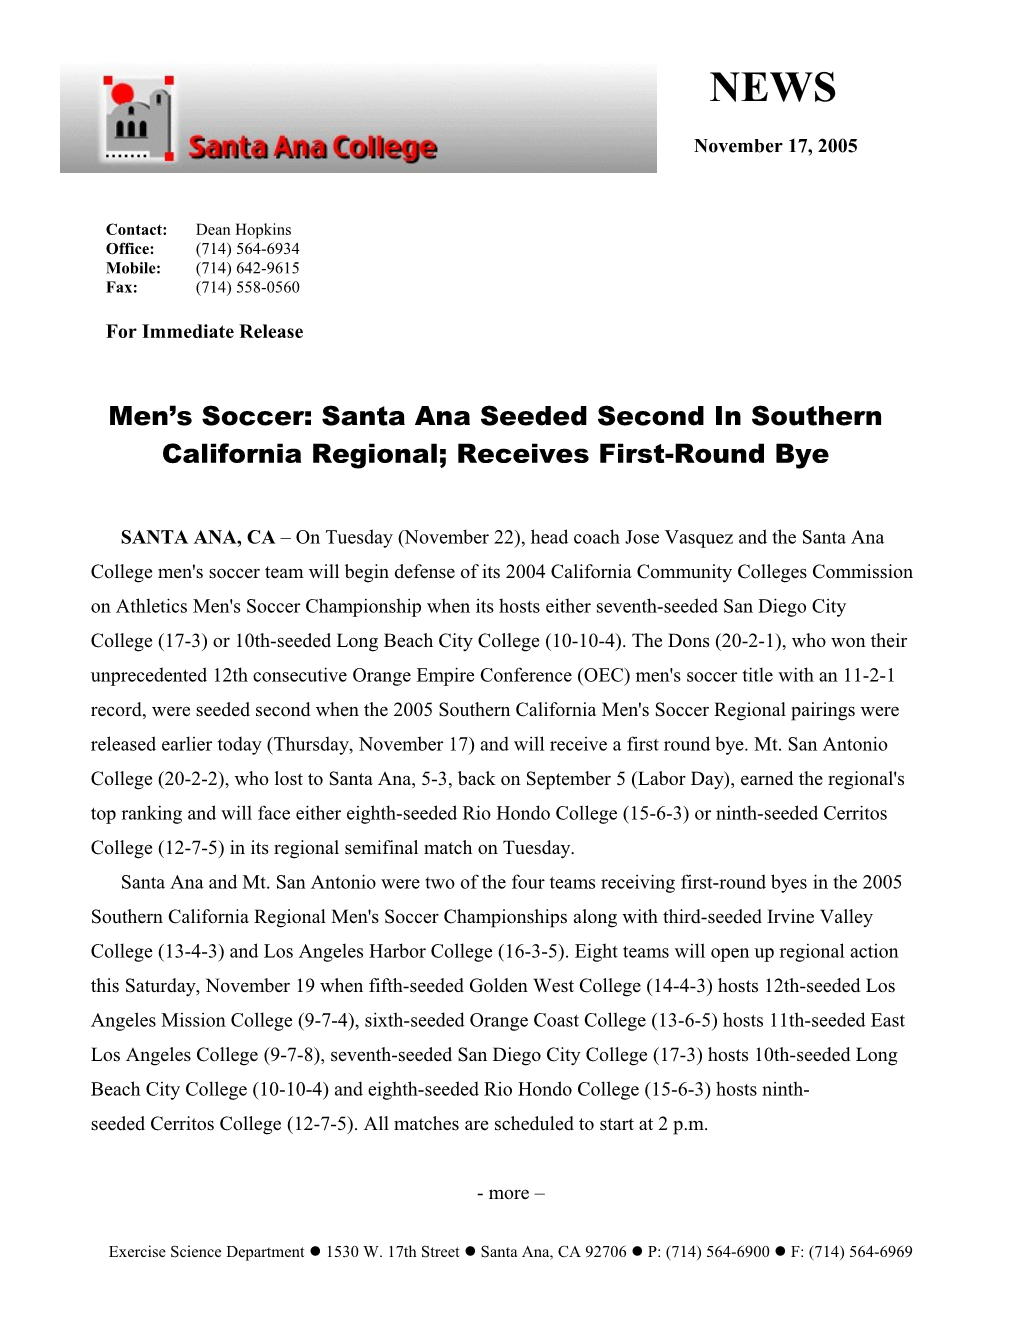 Men S Soccer: Santa Ana Seeded Second in Southern California Regional; Receives First-Round Bye